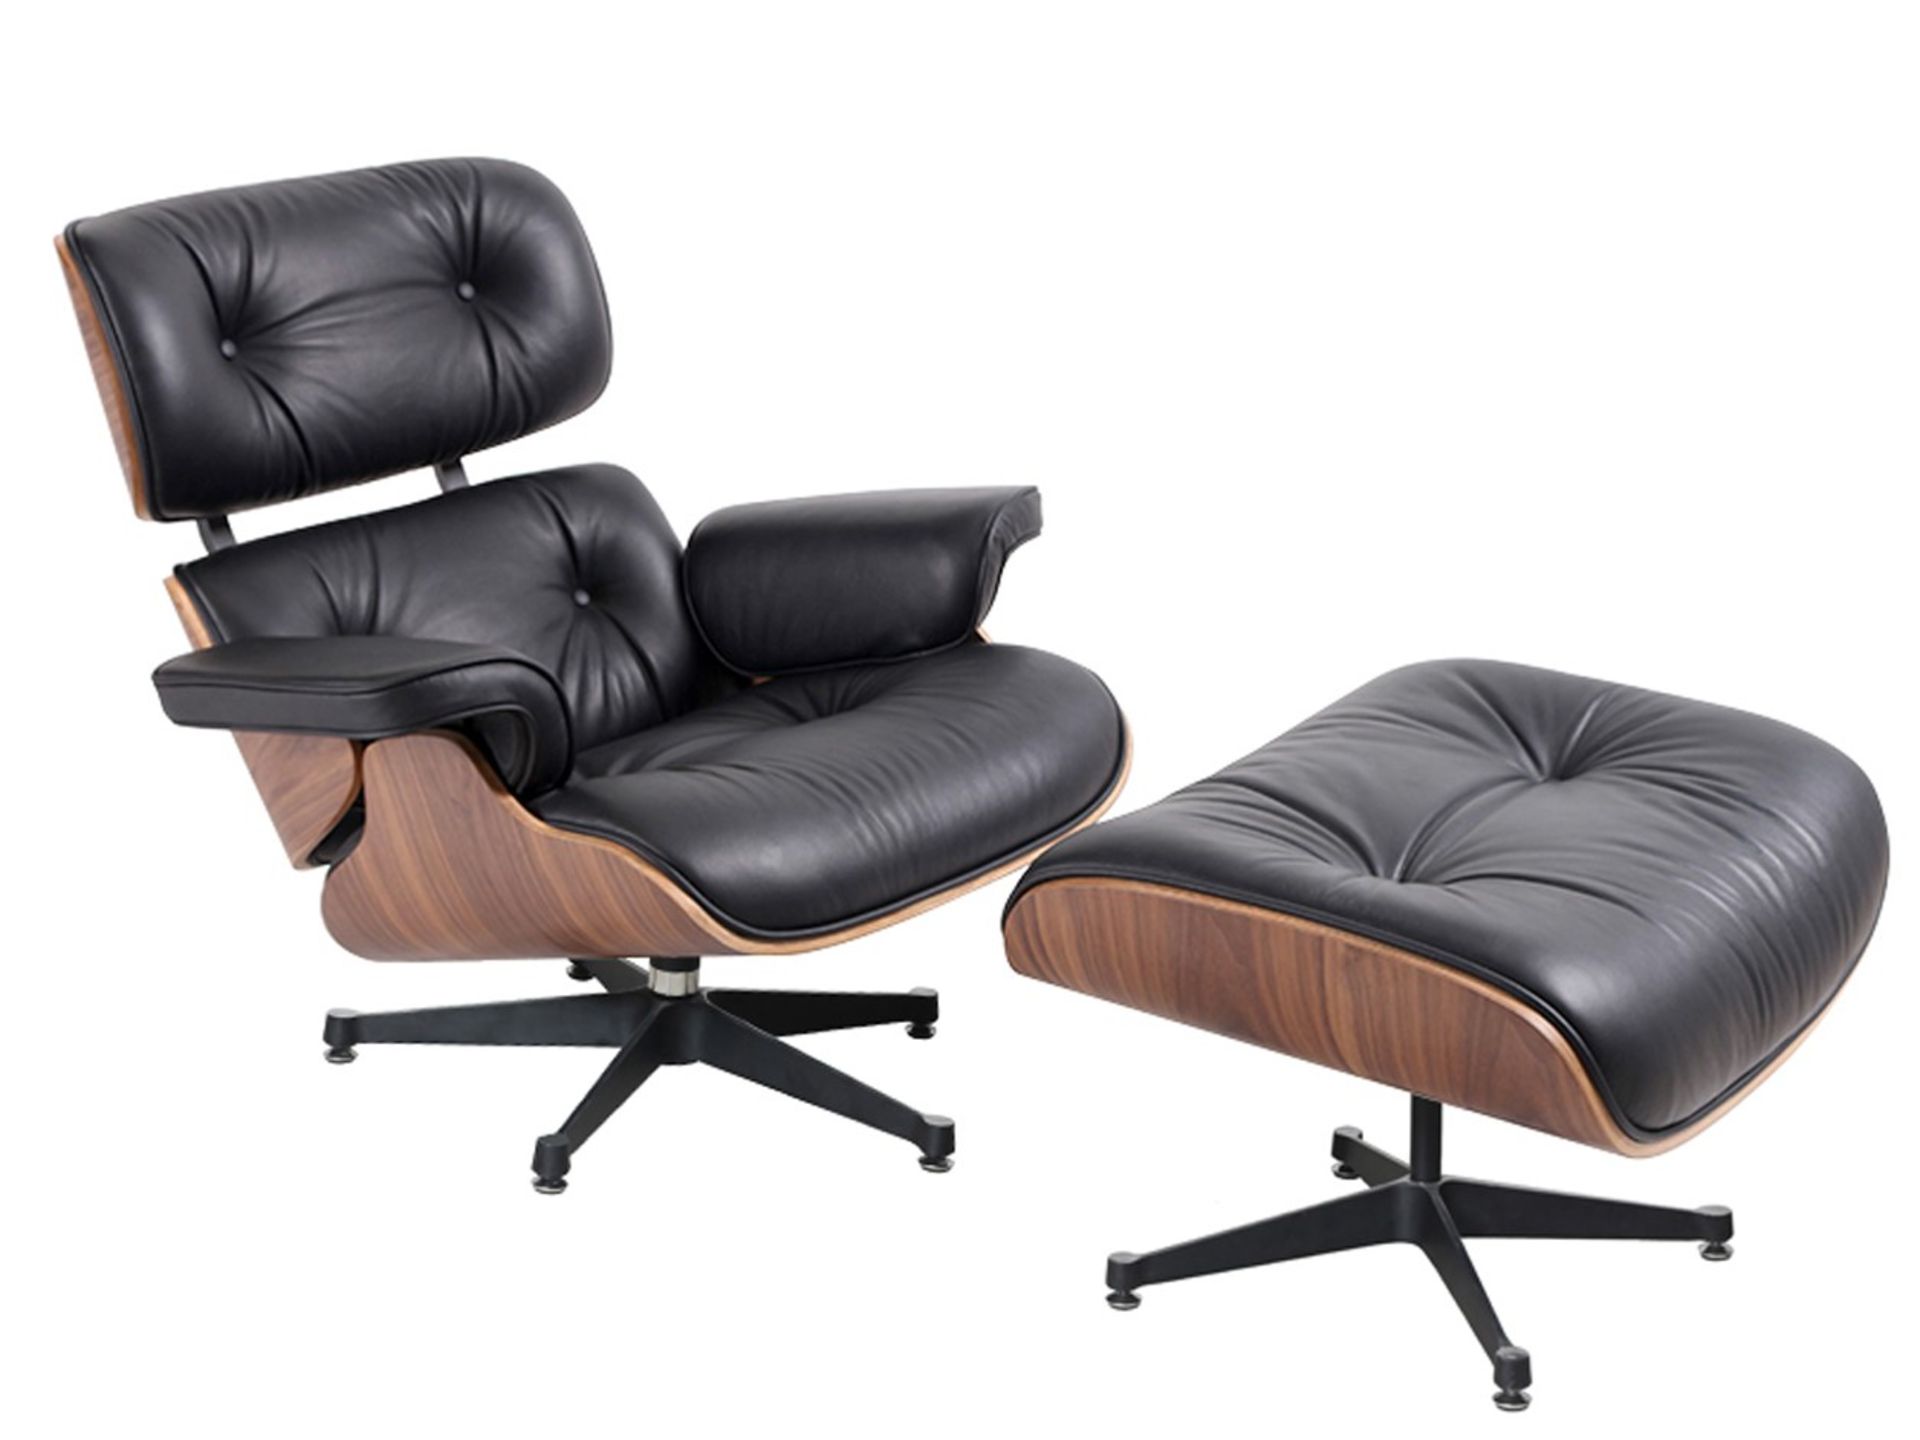 1 x Eames Inspired Lounge Chair With Ottoman - Black Leather and Walnut - Wood - RRP £749!